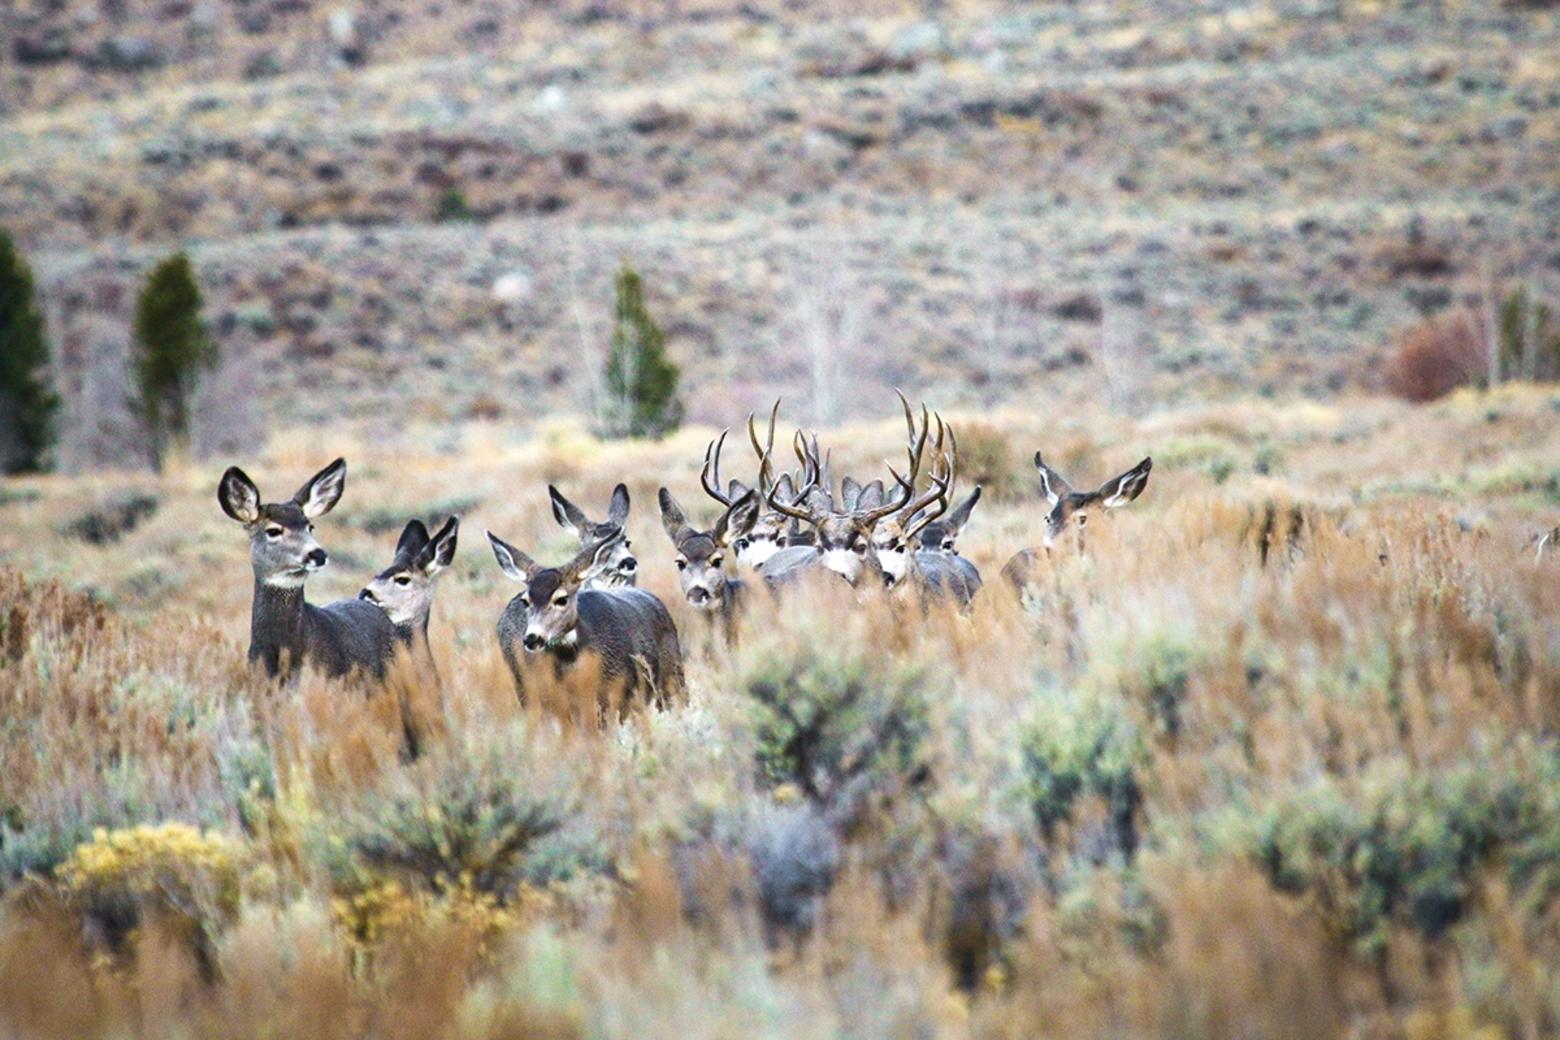 Private property owners provide important habitat for public wildlife, especially wildlife on the move and animals that go to lower grown in winter.  How can conservation and tolerance for wildlife be encouraged on private property. PERC promotes economic incentives but it is a controversial subject and often criticized by some. Photo of mule deer courtesy PERC